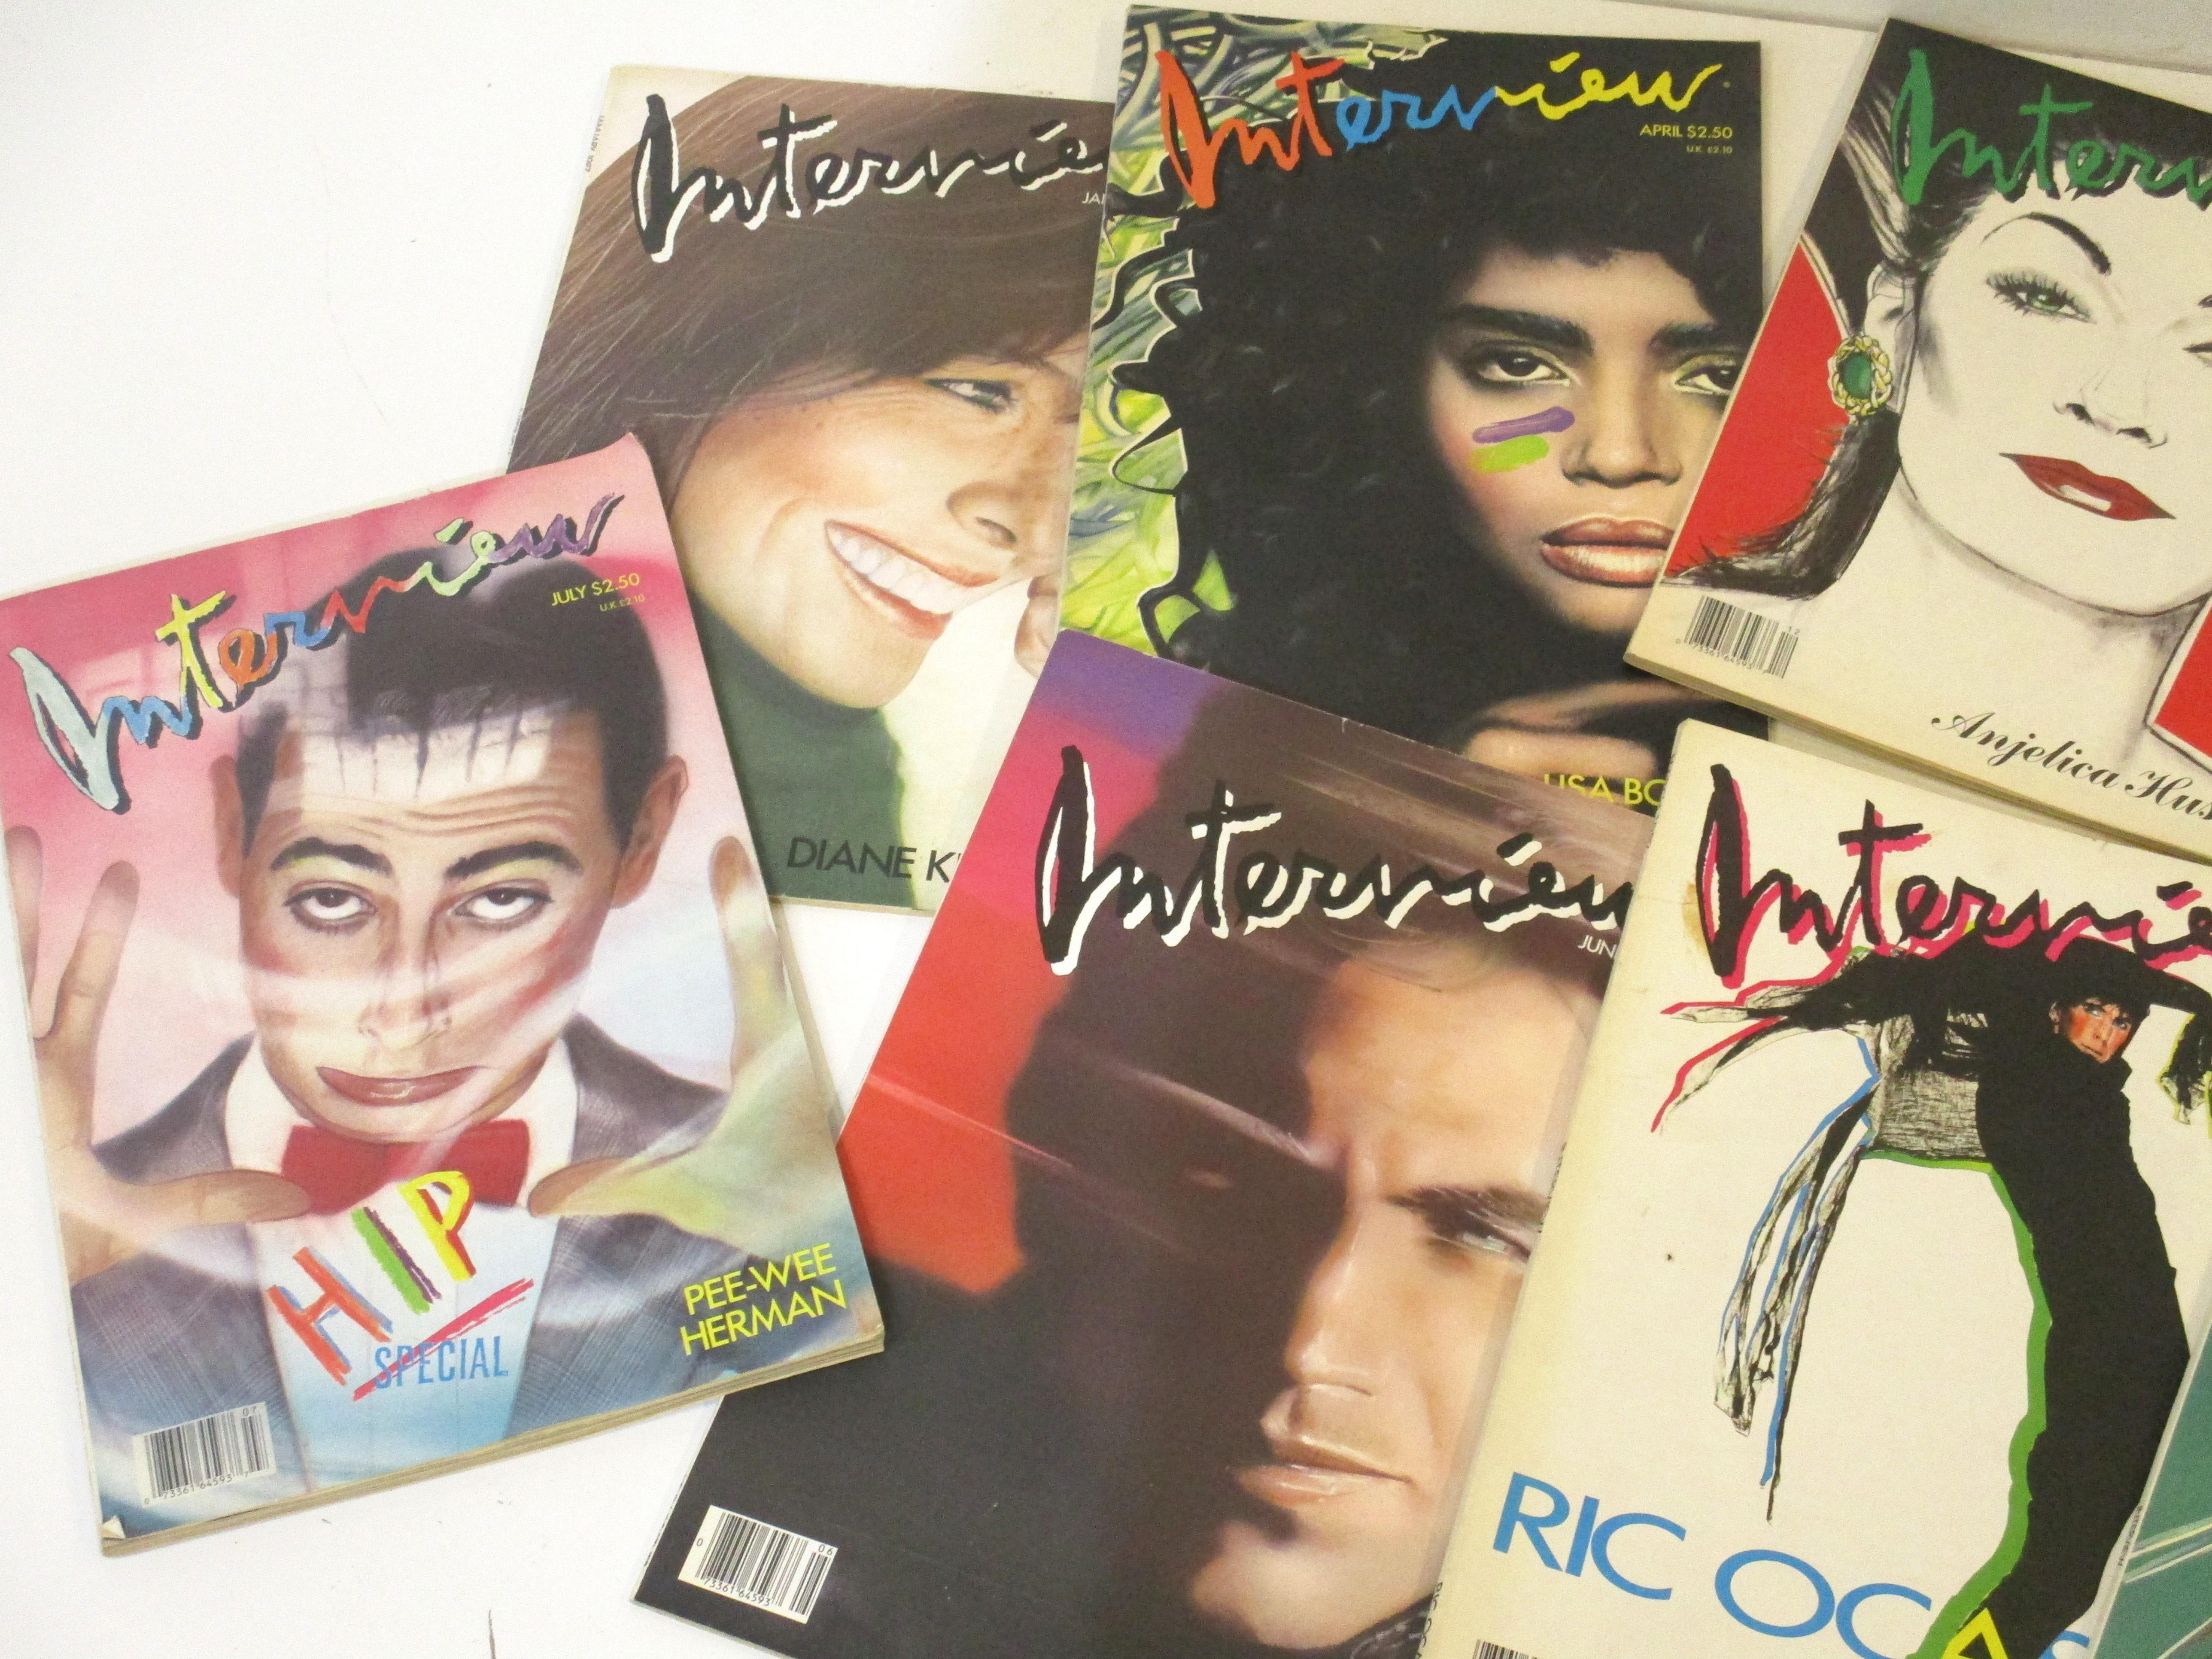 A collection of eight iconic interview magazines published by Andy Warhol with many portrait covers by artist Richard Bernstein.These pieces are a history of art, fashion, photography and stories depicting the go go era of the 1980s with great